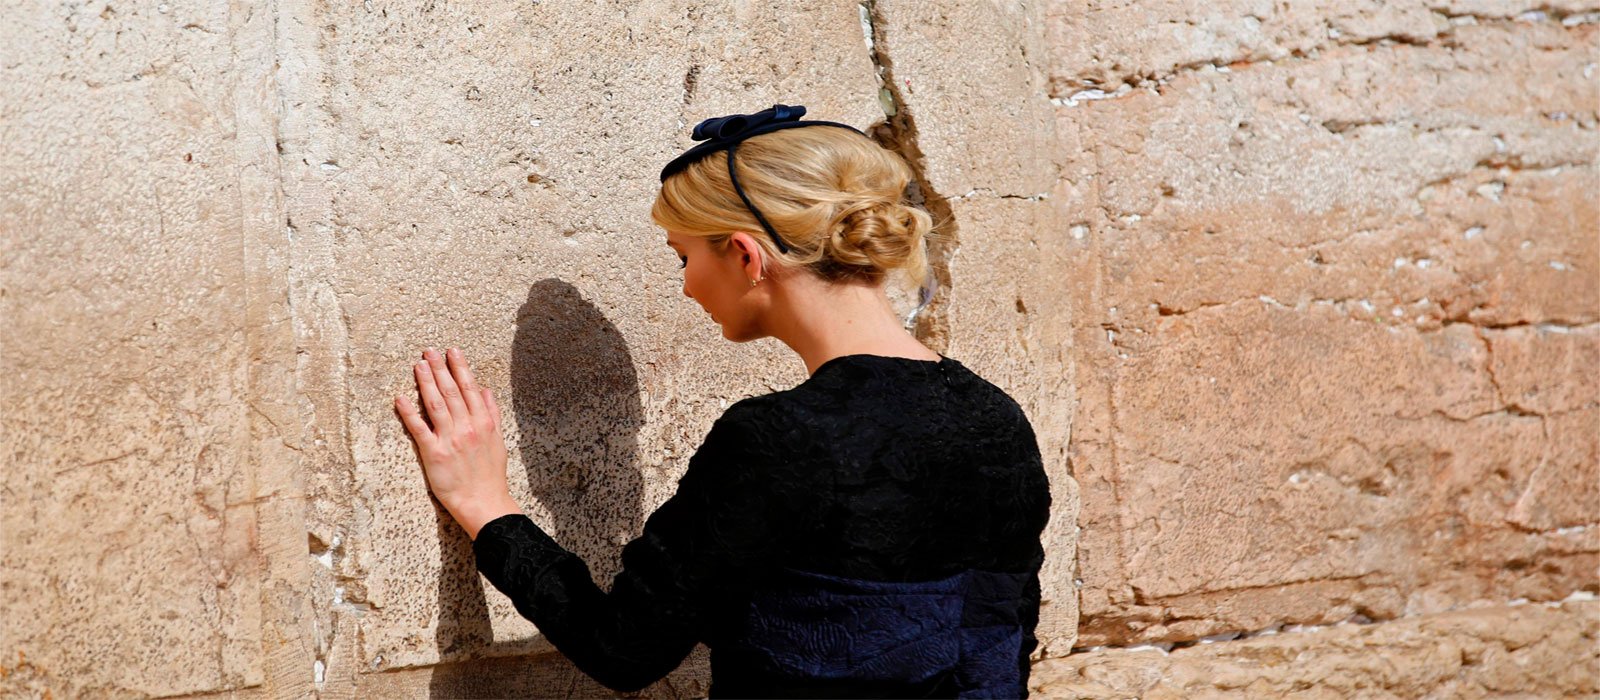 Ivanka’s visit to Western Wall, Jews' holy site in Jerusalem